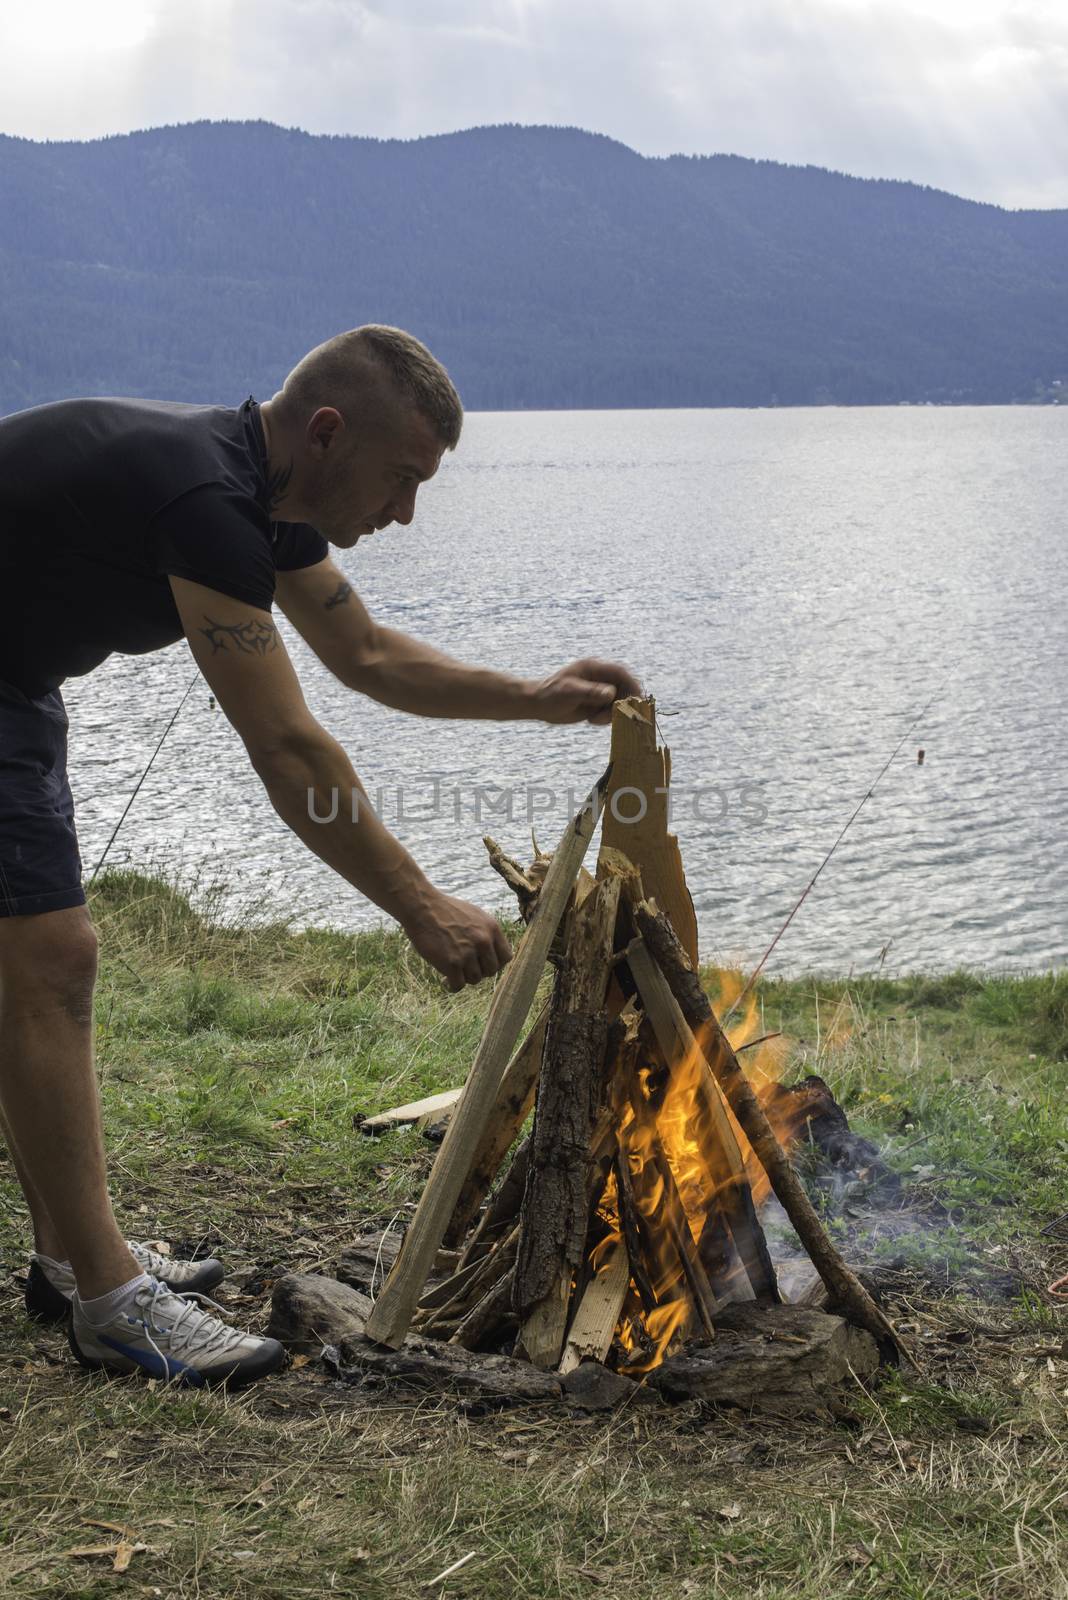 Boy who light fire in a forest. Lake on a background